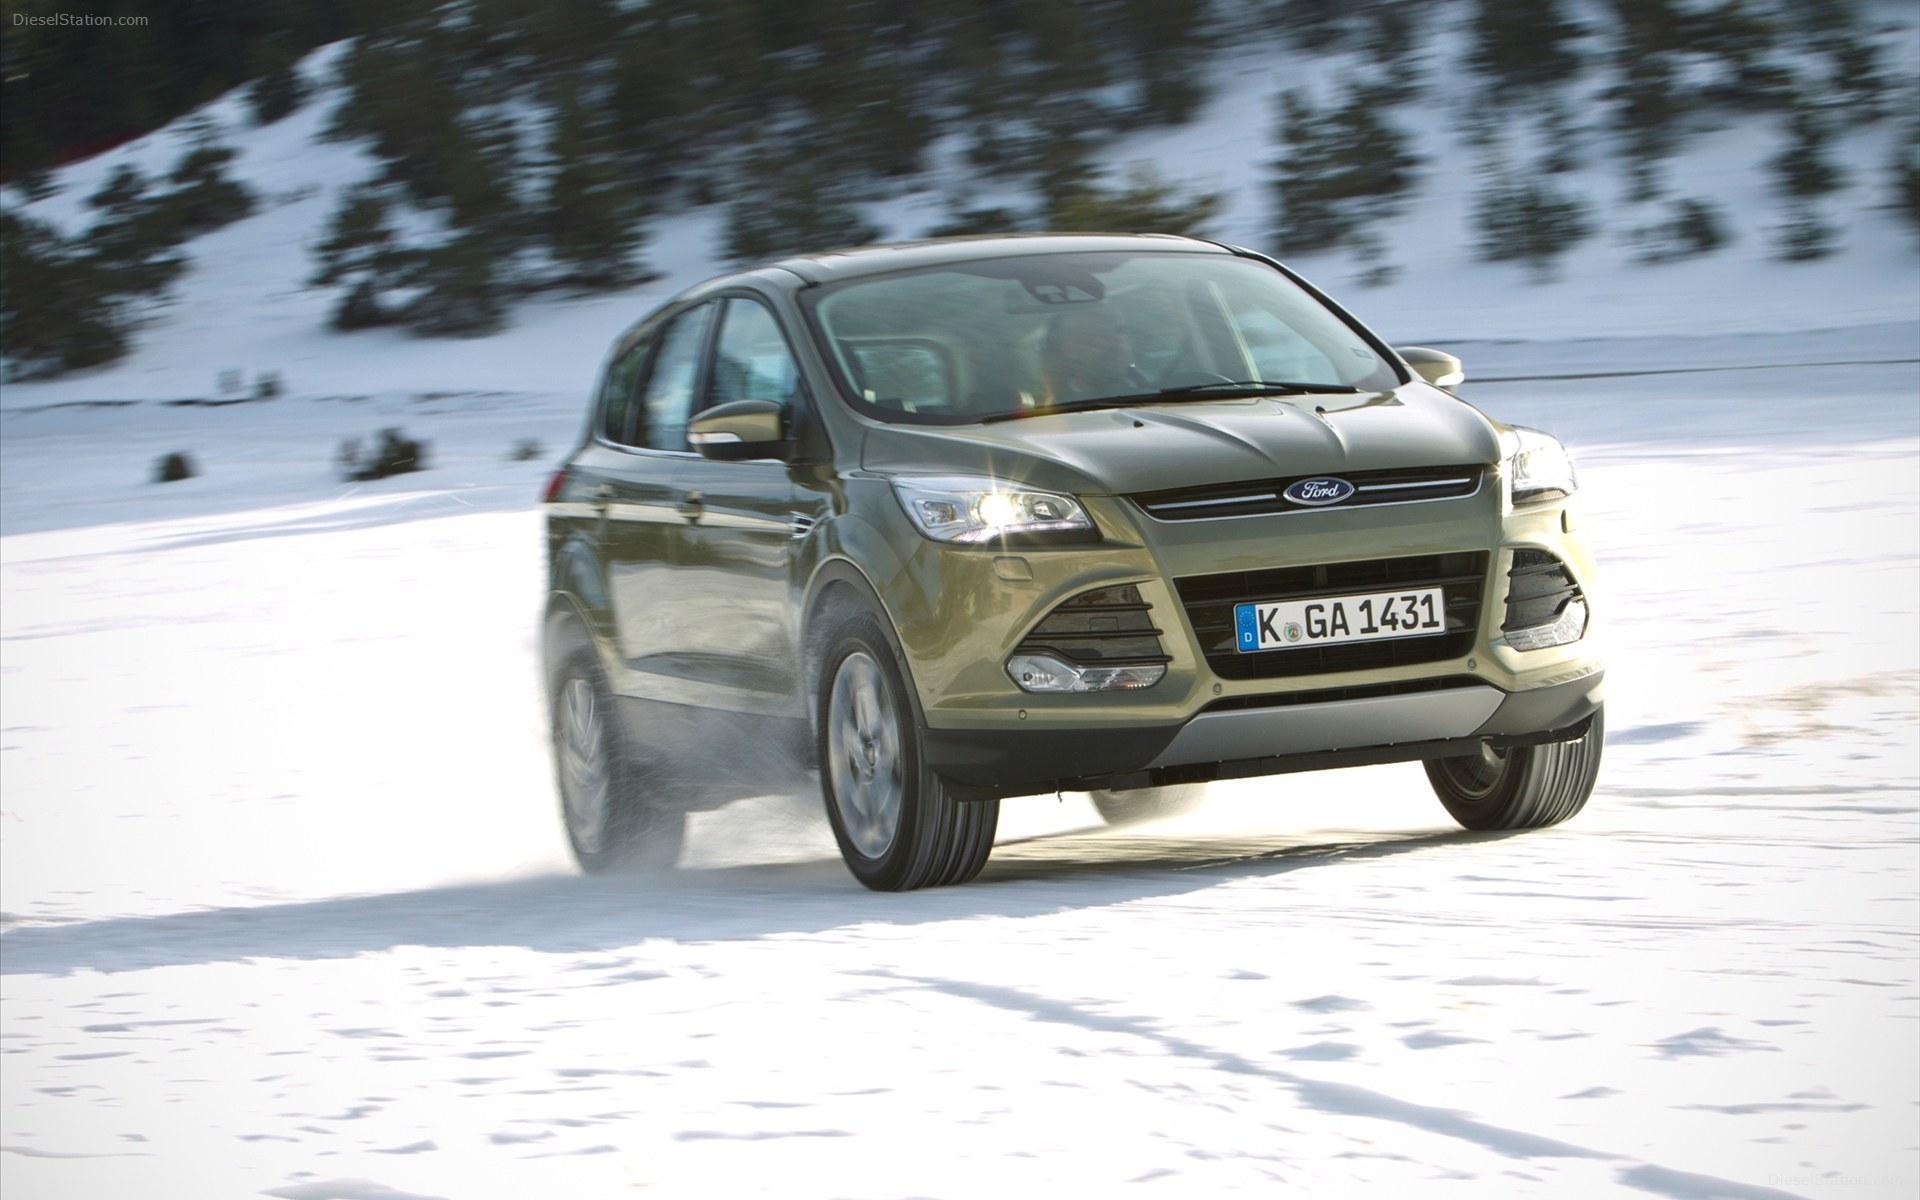 Ford Kuga Widescreen Exotic Car Wallpapers of  Diesel